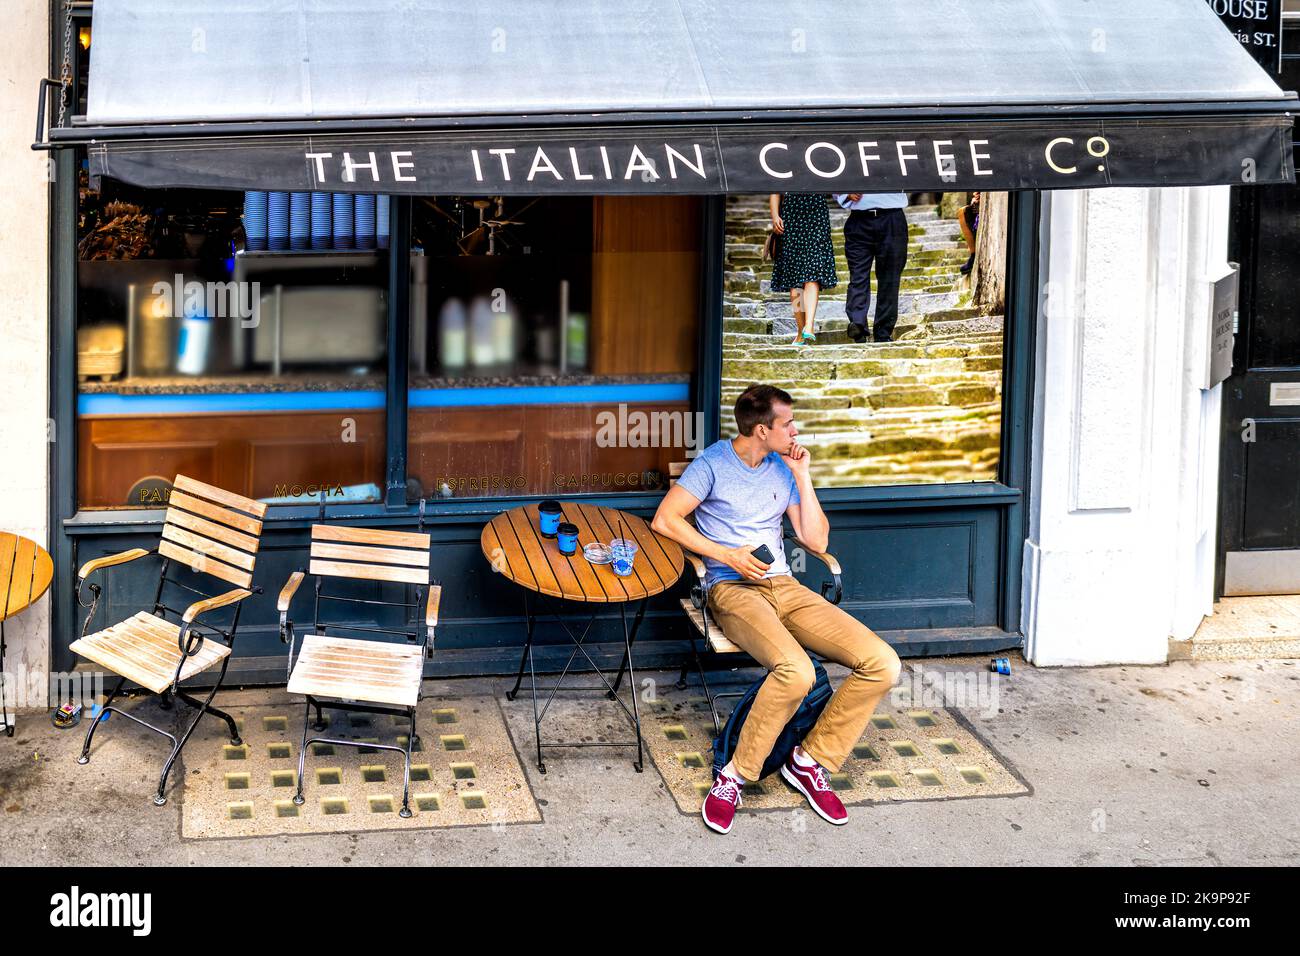 London, United Kingdom - June 22, 2018: High angle view on man sitting at Italian coffee house shop of Caffe Nero on Queen Victoria street sidewalk Stock Photo